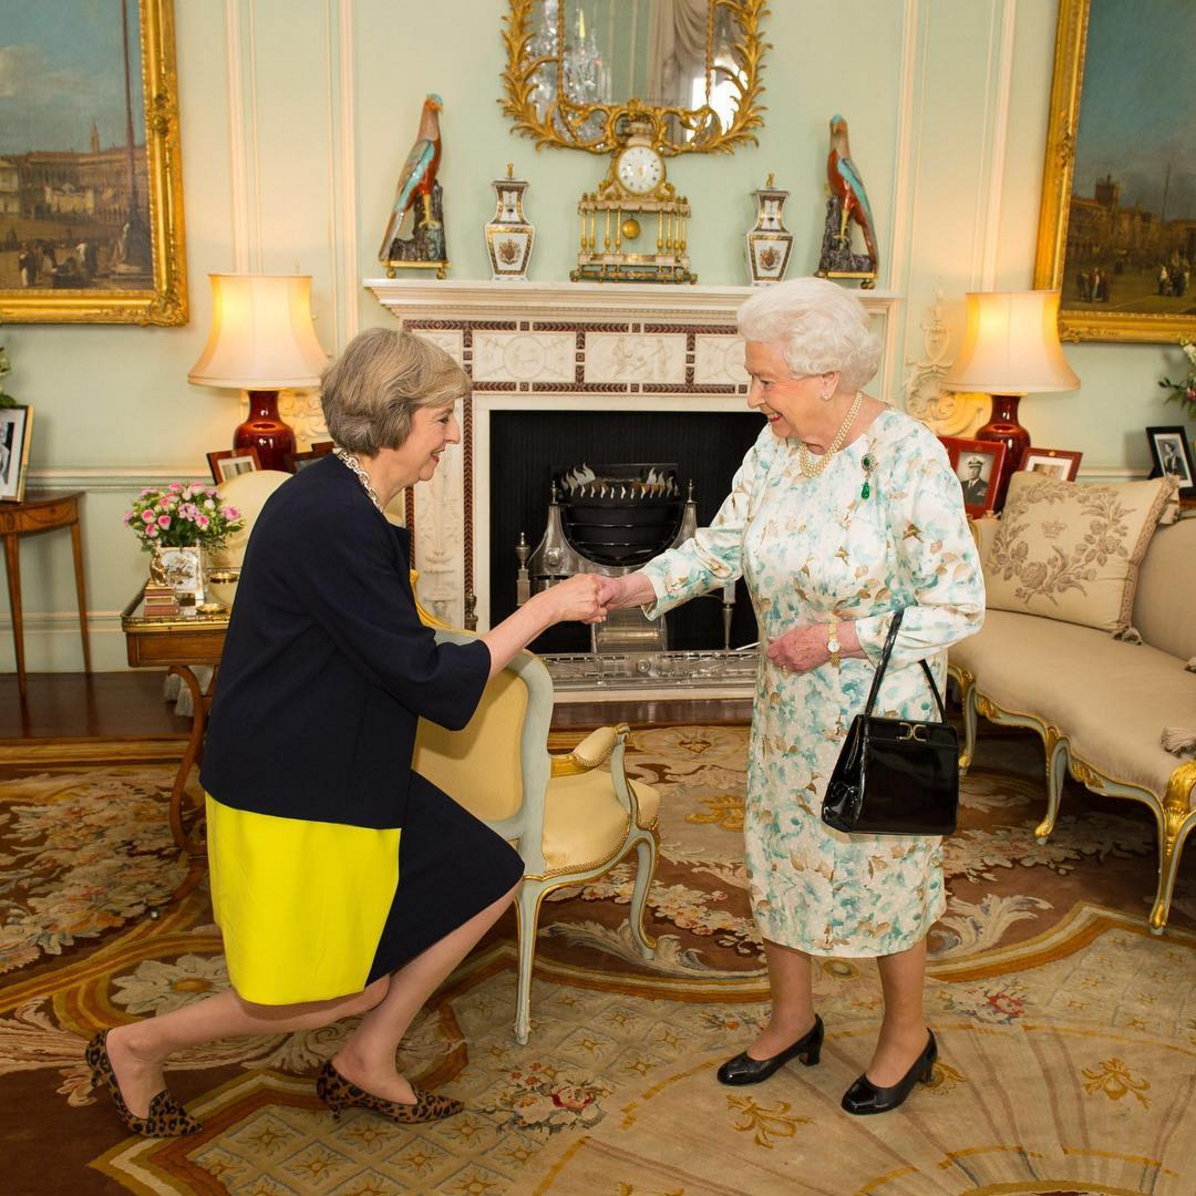 Theresa May in an odd blue-and-yellow skirt curtseys before a tiny Queen Elizabeth II in a formal dining room in Buckingham Palace